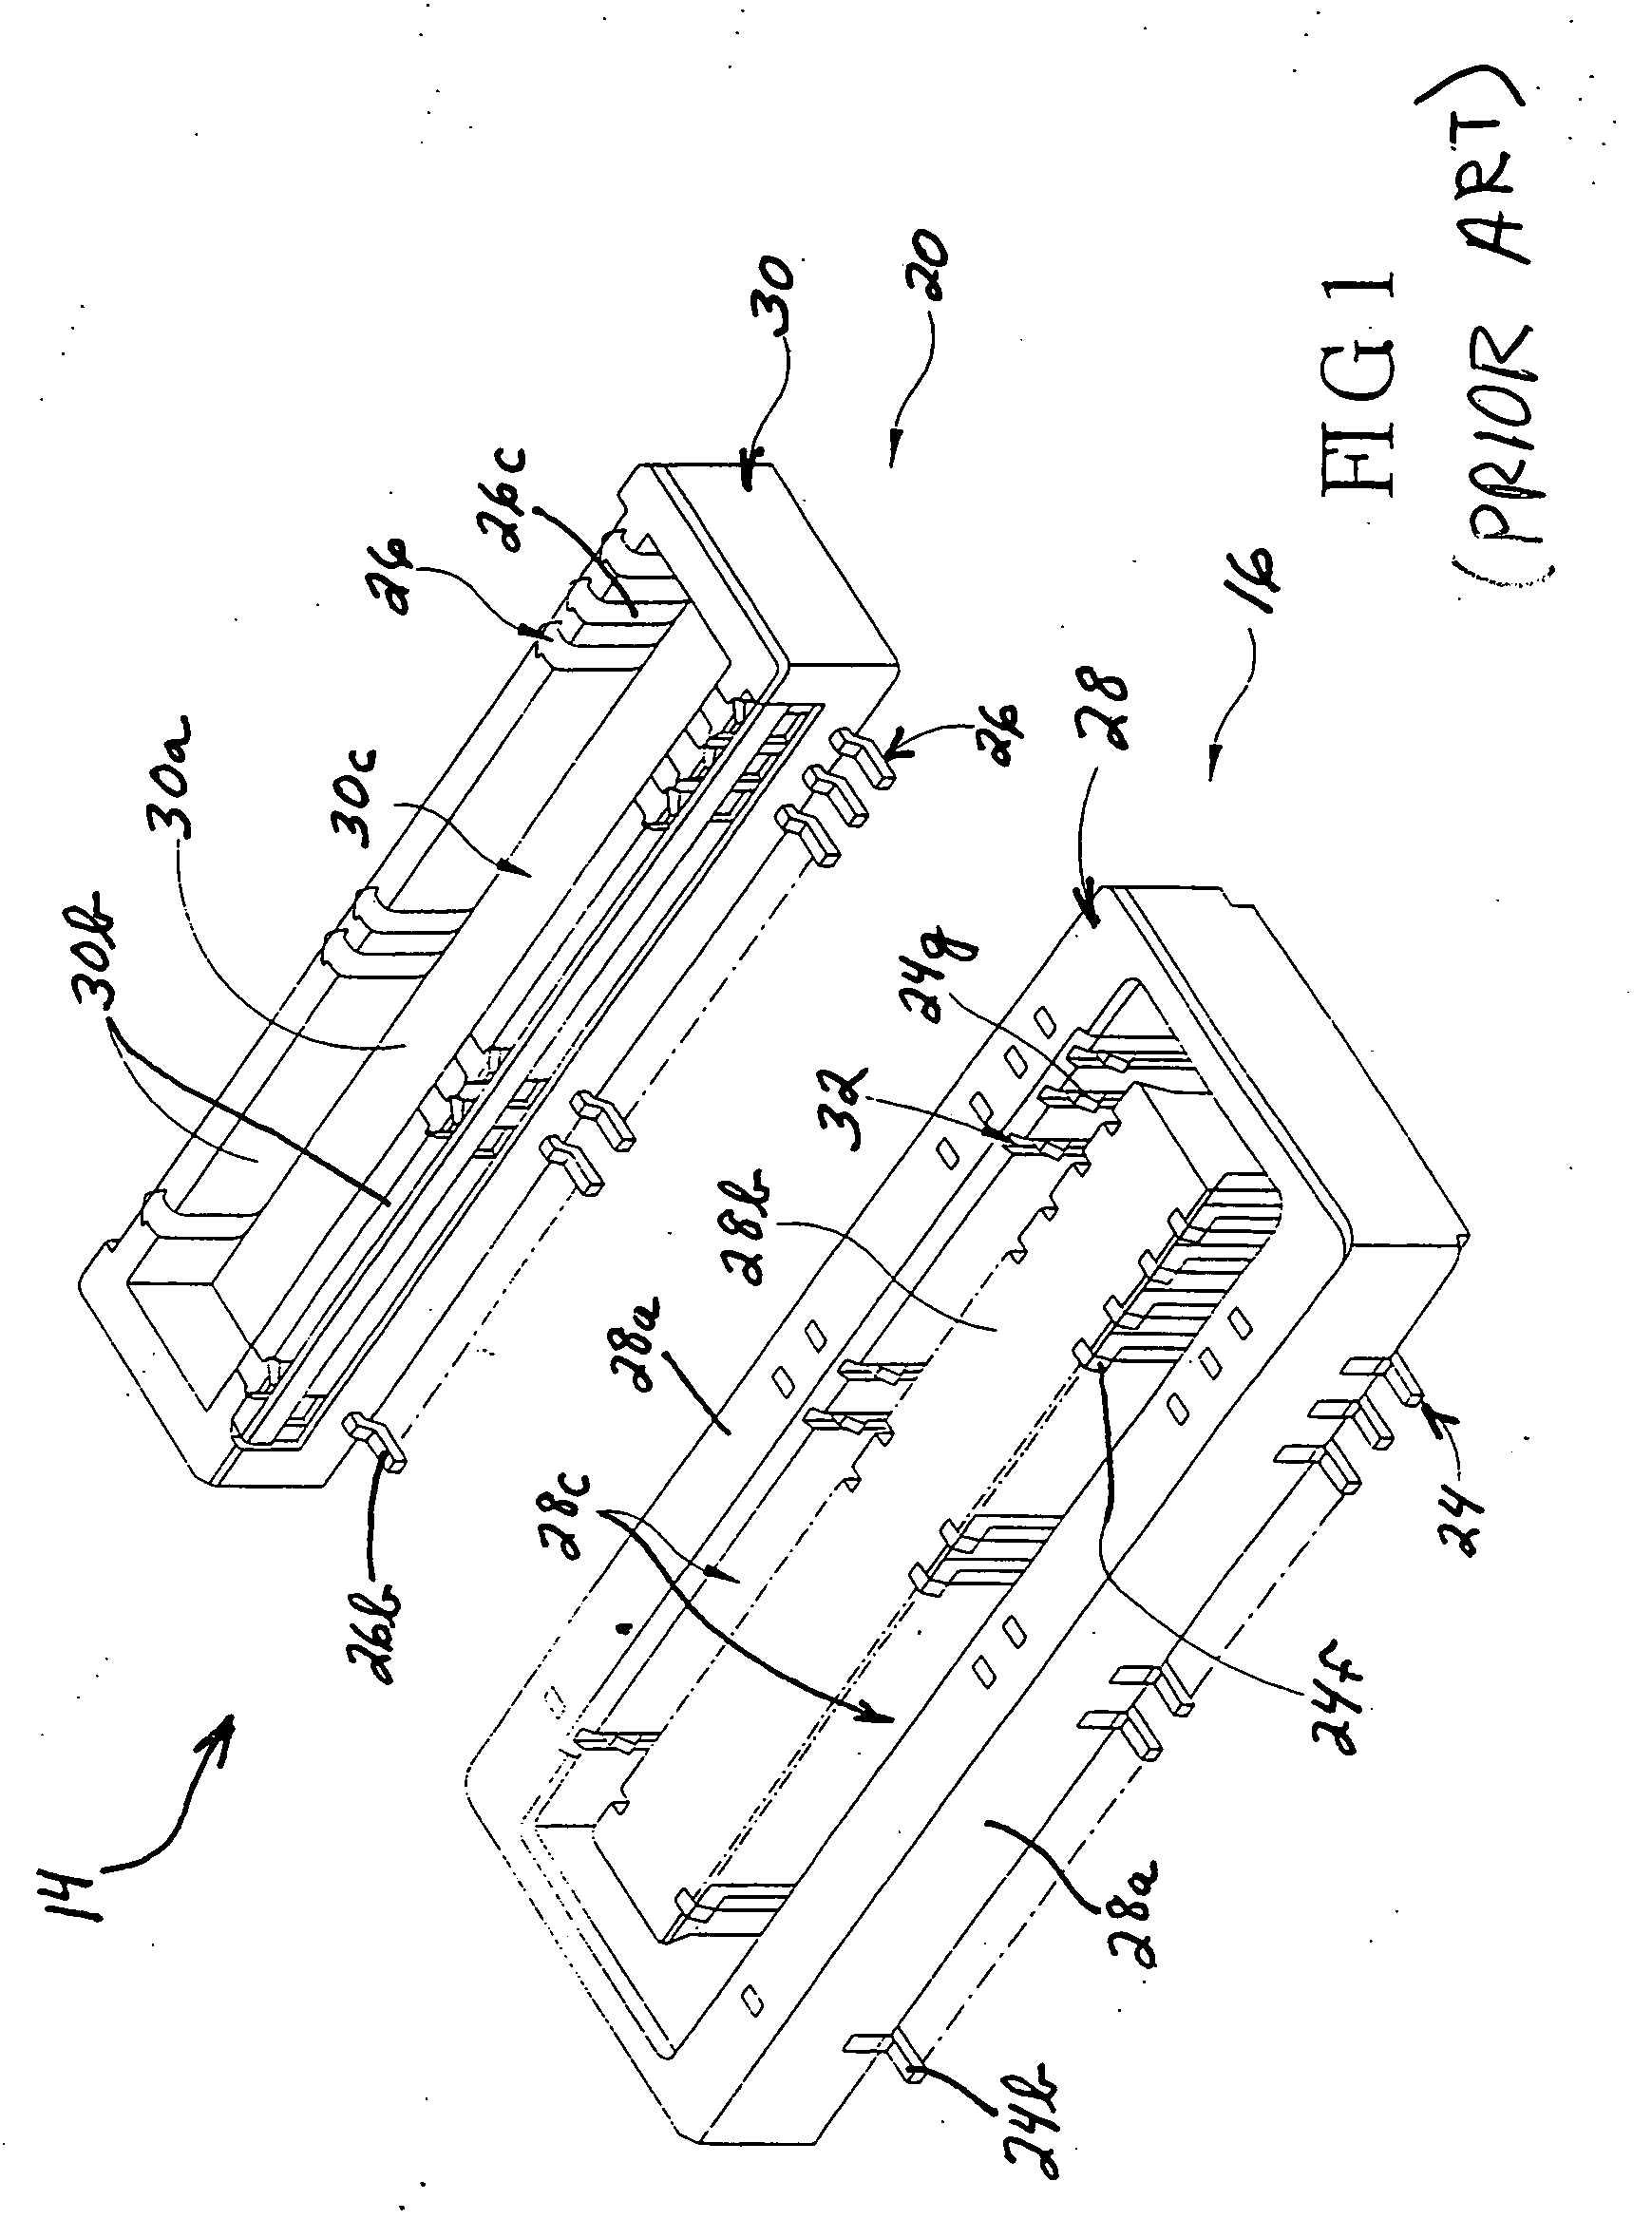 Board-to-board connector with improved terminal contacts